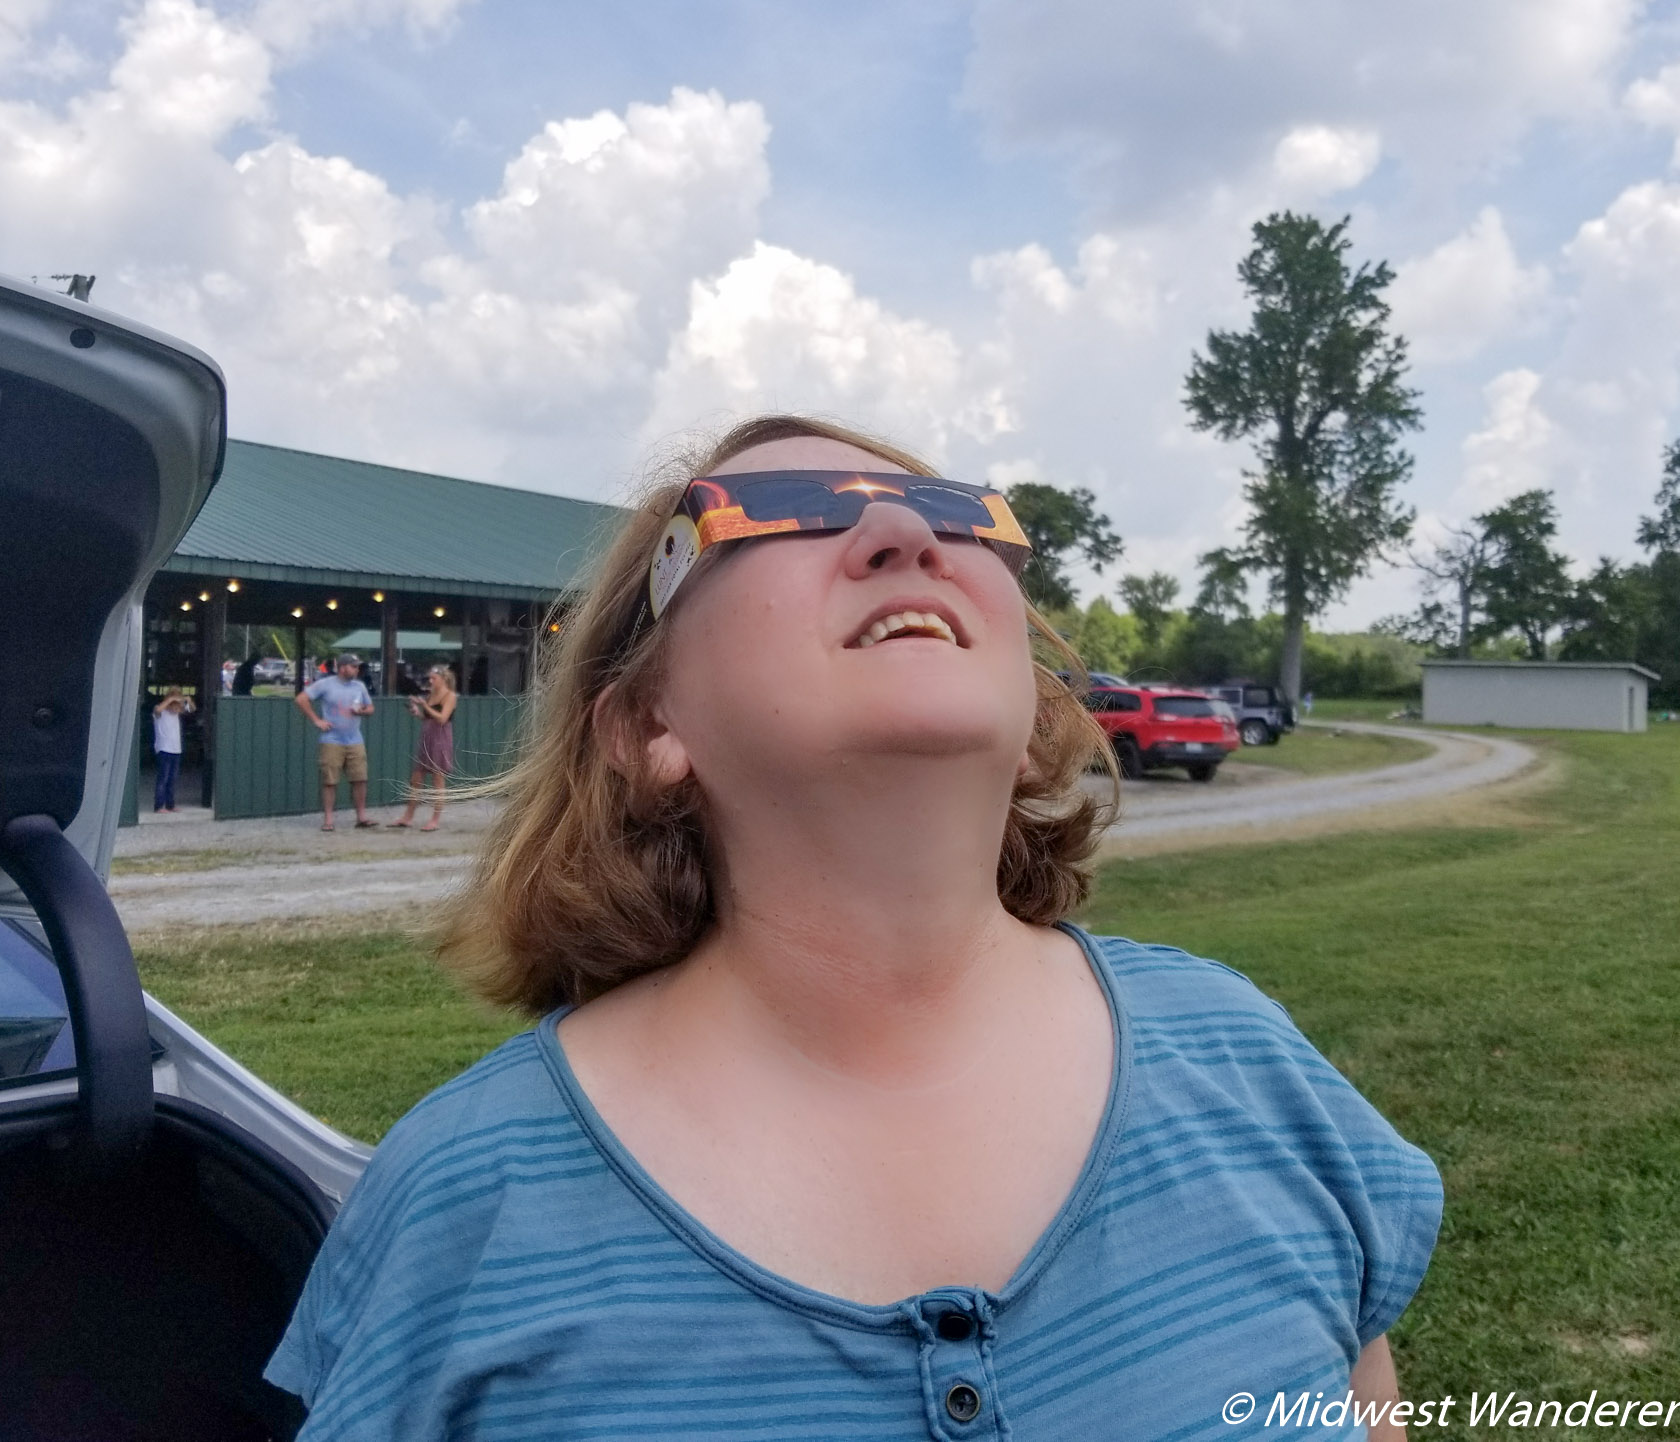 Solar eclipse viewing